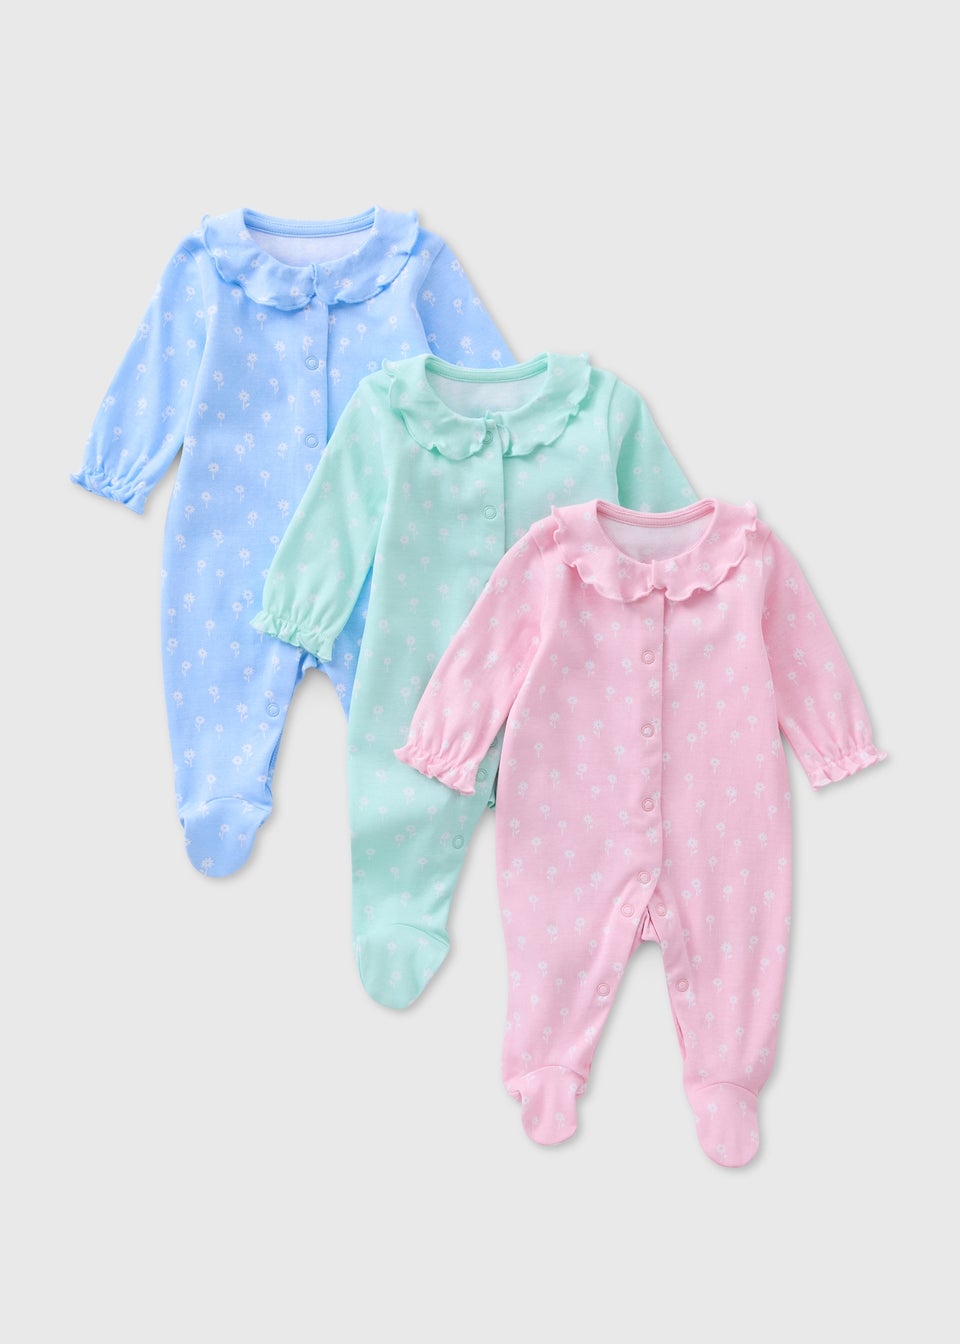 Baby 3 Pack Multicolour Floral Sleepsuits (Tiny Baby-18mths)